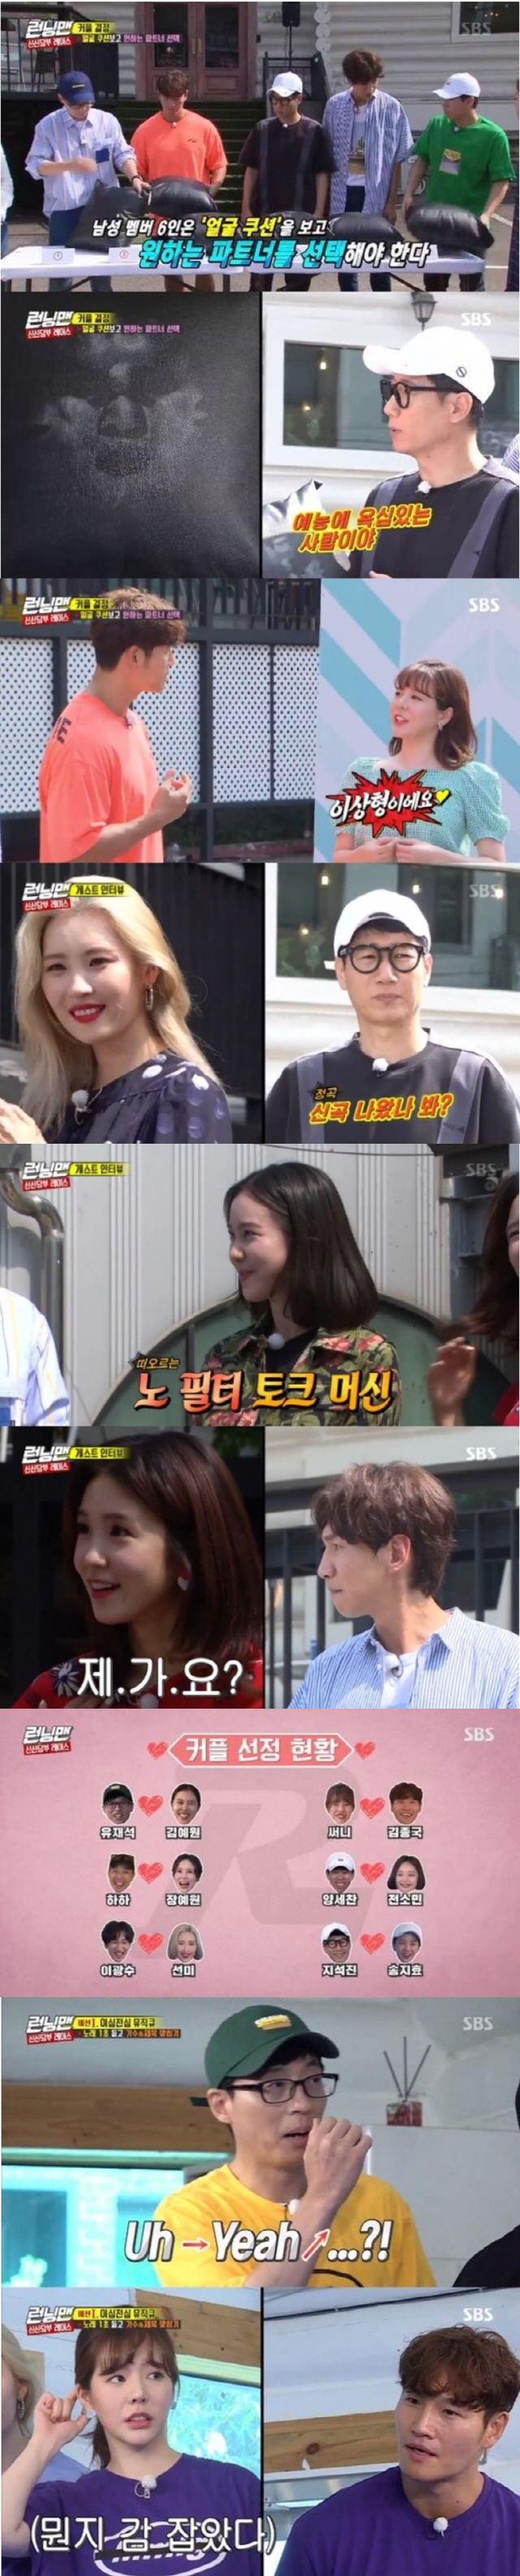 SBS Running Man soared to 6.2% of the highest Per minute ratings, ranking first in the same time zone of 2049 target audience rating.The show was decorated with a couple race of Shin Shin-dangbu, attracting attention with the appearance of Sunny of Girls Generation, singer Sunmi, actor Kim Ye-won and announcer Jang Ye-won.Competition for selecting couples has been fierce since the beginning.Kim Ye-won and Sunmi wanted a couple with Lee Kwang-soo, but Lee Kwang-soo chose Jang Ye-won announcer.However, Jang Ye-won announcer rejected Lee Kwang-soo and Choices Kim Jong-kook, saying, I am curious to see you for the first time.However, Kim Jong-kooks final Choices were Sunny, and Sunmi X Lee Kwang-soo, Jang Ye-won X Haha, Kim Ye-won X Yoo-Suk, Ji Suk-jin X Song Ji-hyo, and Yang Se-chan X Jeon So-min were confirmed as the couple.The first mission on the day was a Lee Sim-jeon-shim Music Cue, which listens to the song for one second and is hit, and a fierce confrontation was held for each couple.Among them, Sunny took first place with two problems with the Idol ranking number one dance performance, and Haha X Jang Ye-won couple and Sunmi X Lee Kwang-soo couple took first place in the second mission equality traffic light.This race must be disguised as a human being and must find the god of light, the god of darkness, and the prophet hidden in the members. Only the first team gave the God of Light and the prophet hint.Kim Ye-won and Jang Ye-won (whose names are the same as each other) and Yang Se-chan (Running Man is not the god of light) were released.The scene was the best one minute with a 6.2% Per minute highest audience rating.The final results of Race will be released on next weeks broadcast, and the stage of the domestic fan meeting Running District will also be unveiled.